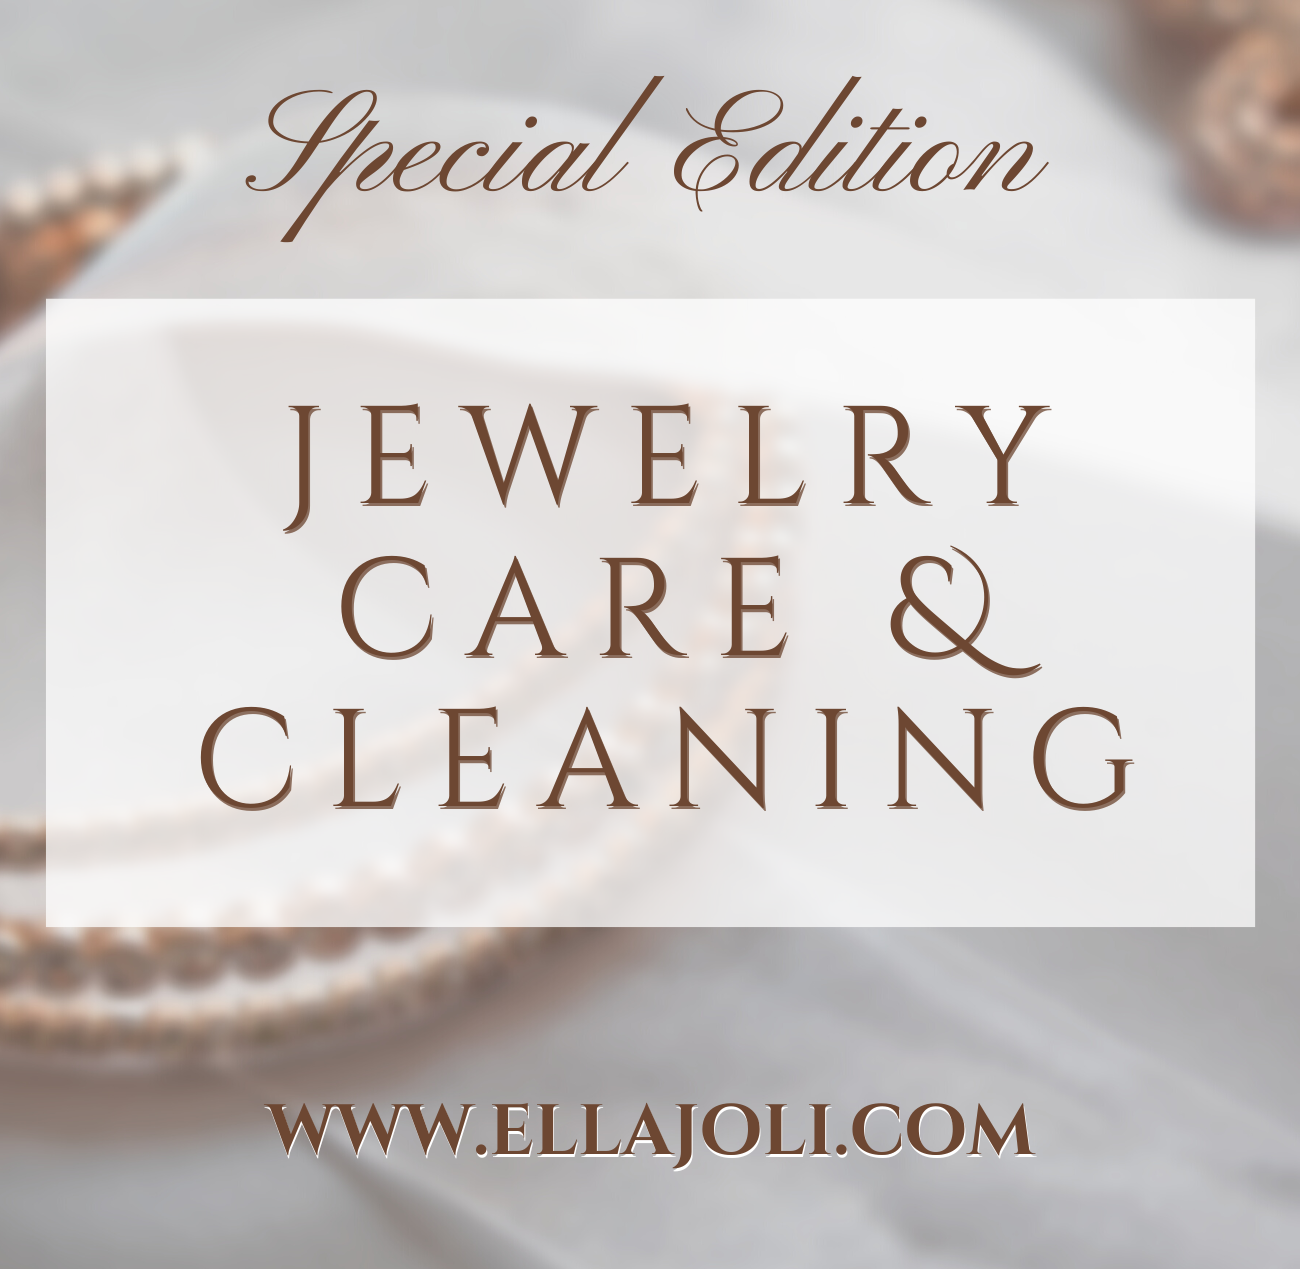 Jewelry Care & Cleaning